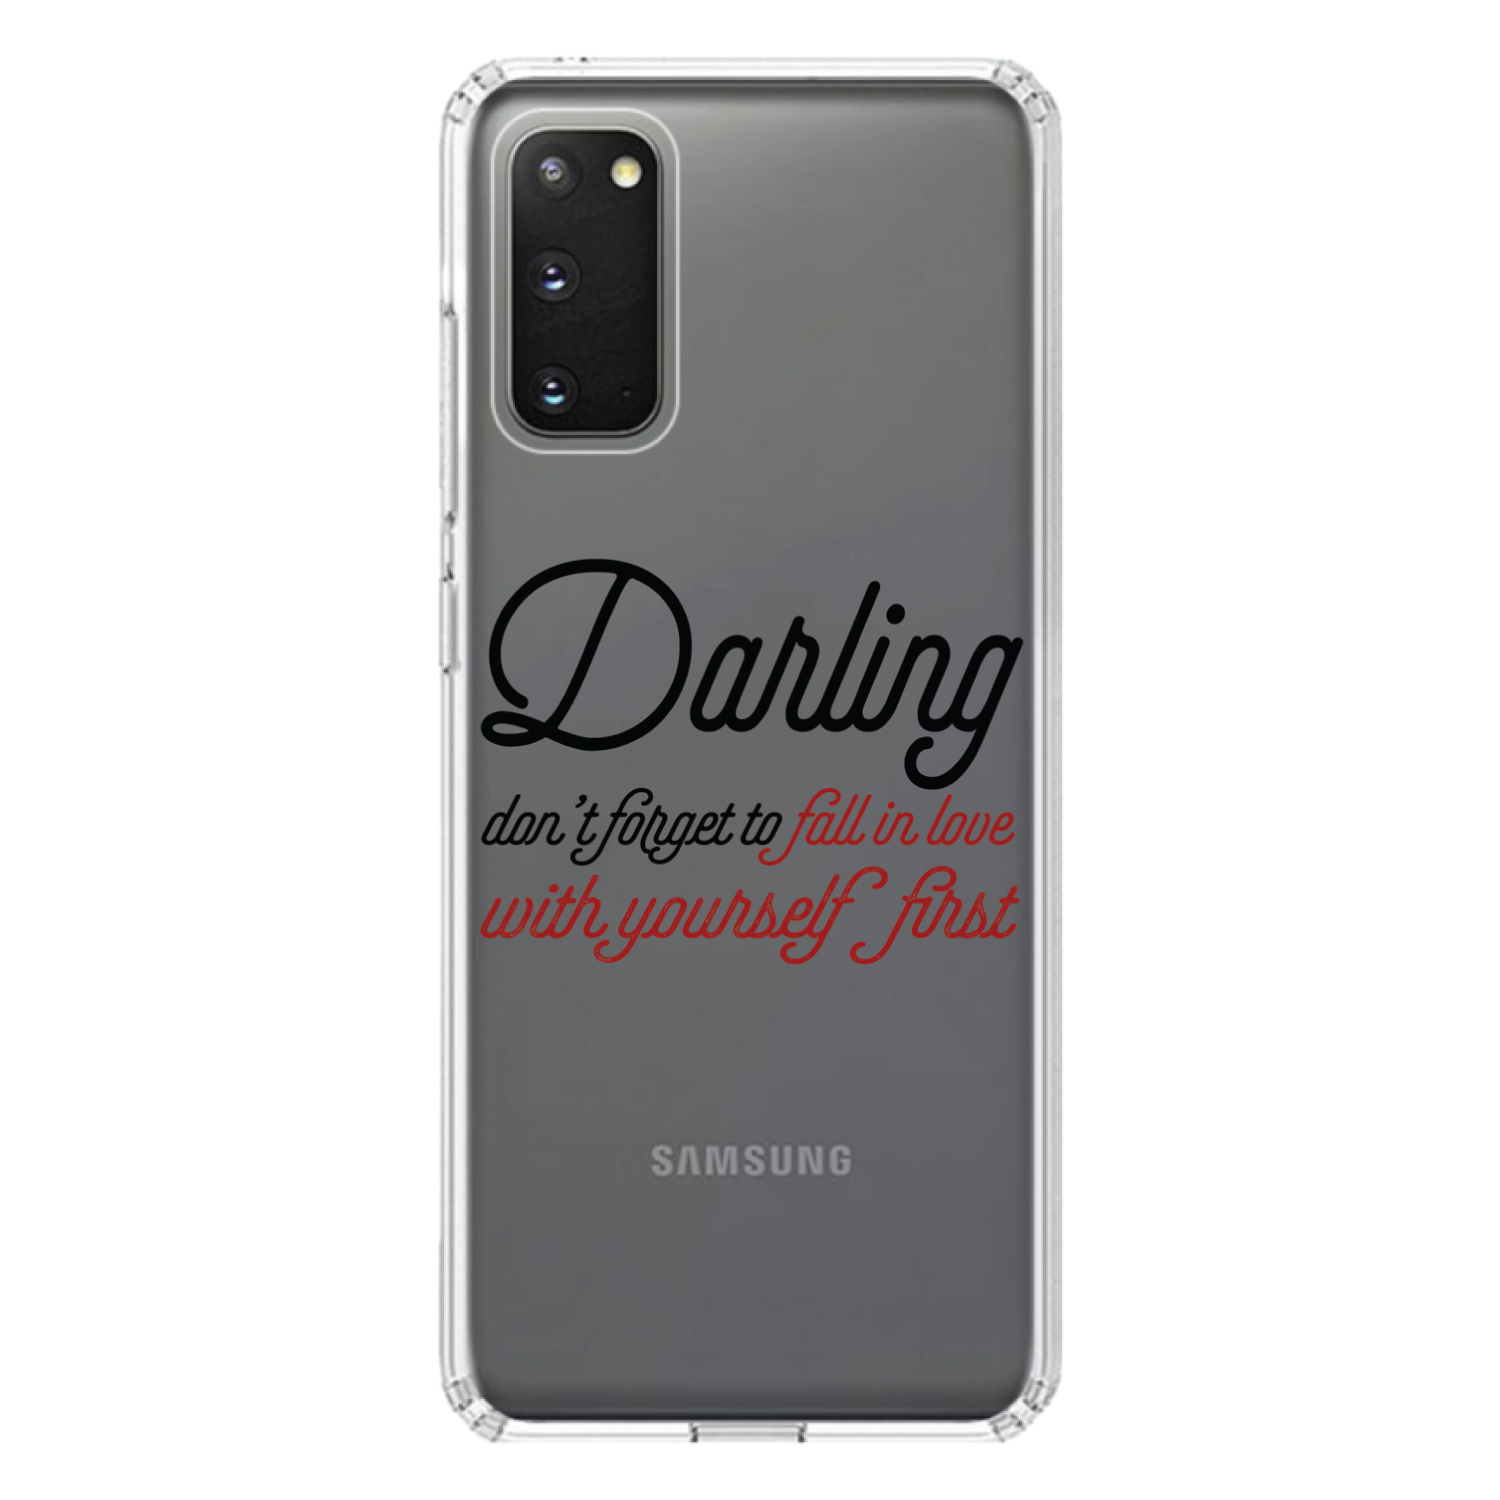 DistinctInk Clear Shockproof Hybrid Case for Galaxy S20 PLUS / 5G (6.7" Screen) - TPU Bumper Acrylic Back Tempered Glass Screen Protector - Darling Don't Forget to Fall In Love with Yourself - image 1 of 2